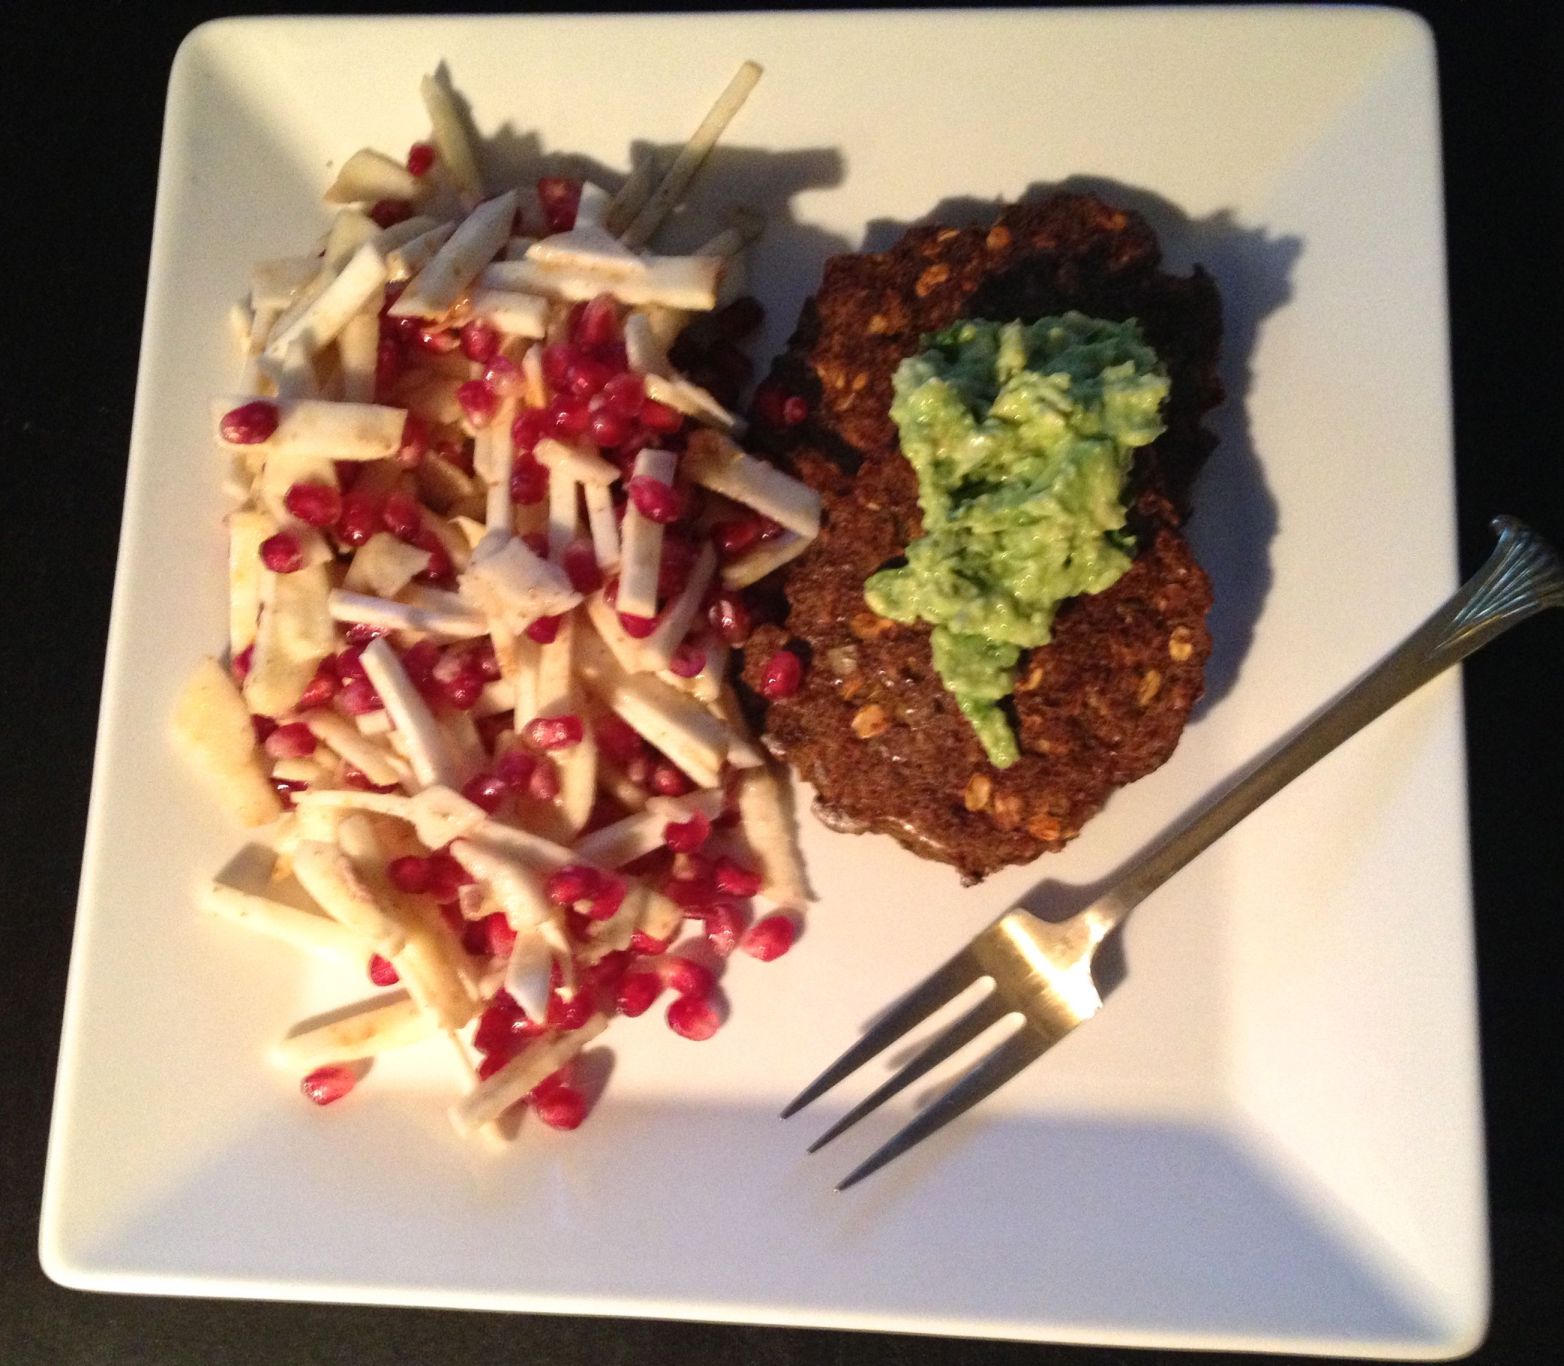 Roasted Veggie Burger and Celery Root Salad